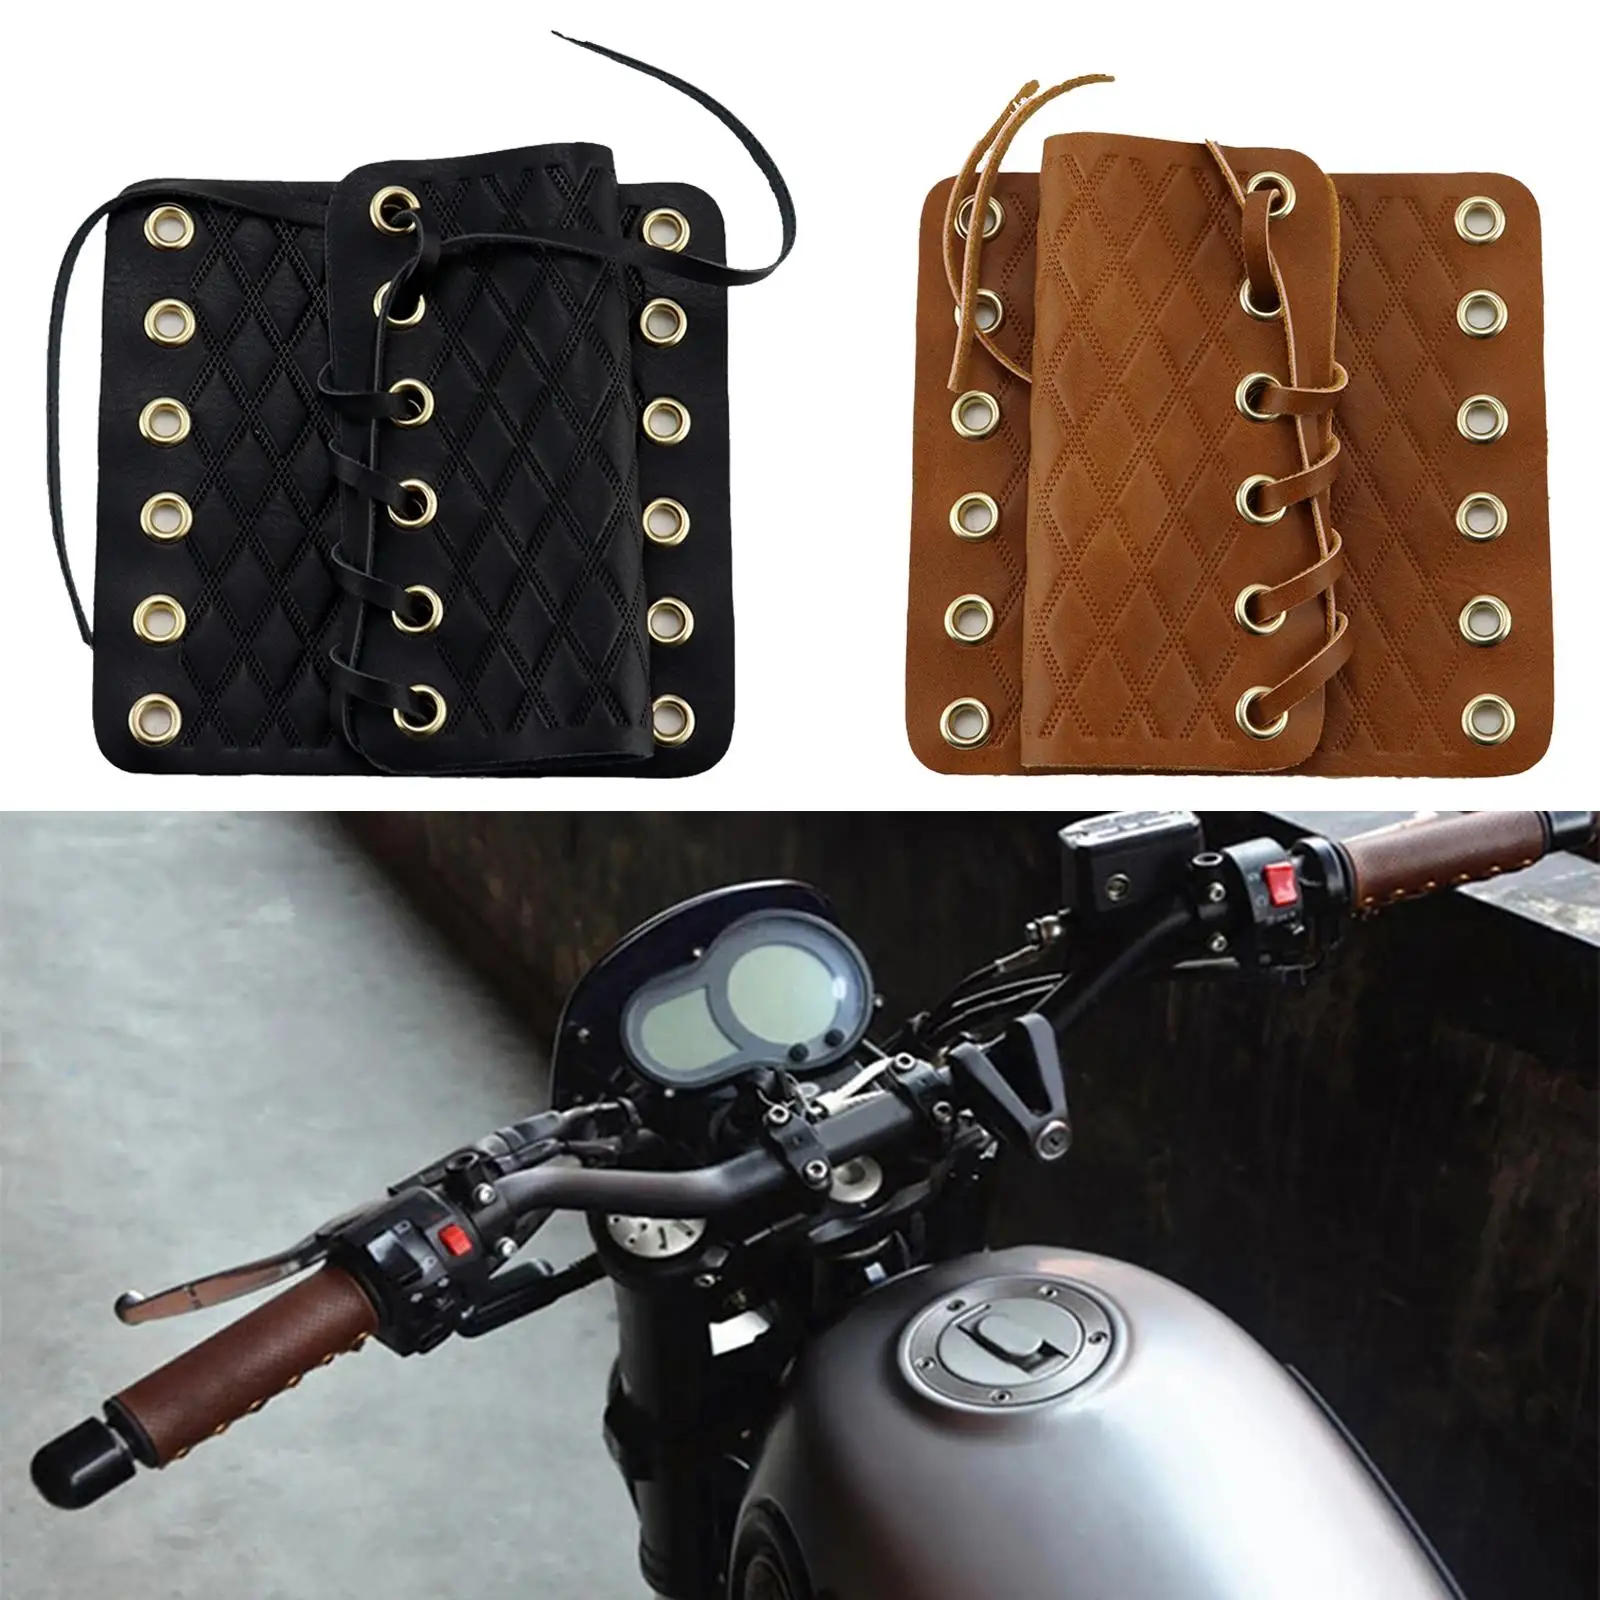 Universal Motorcycle Hand Grips Cover Shock Absorb Throttle Grip Covers PU Leather for Most Motorbikes All Handgrips